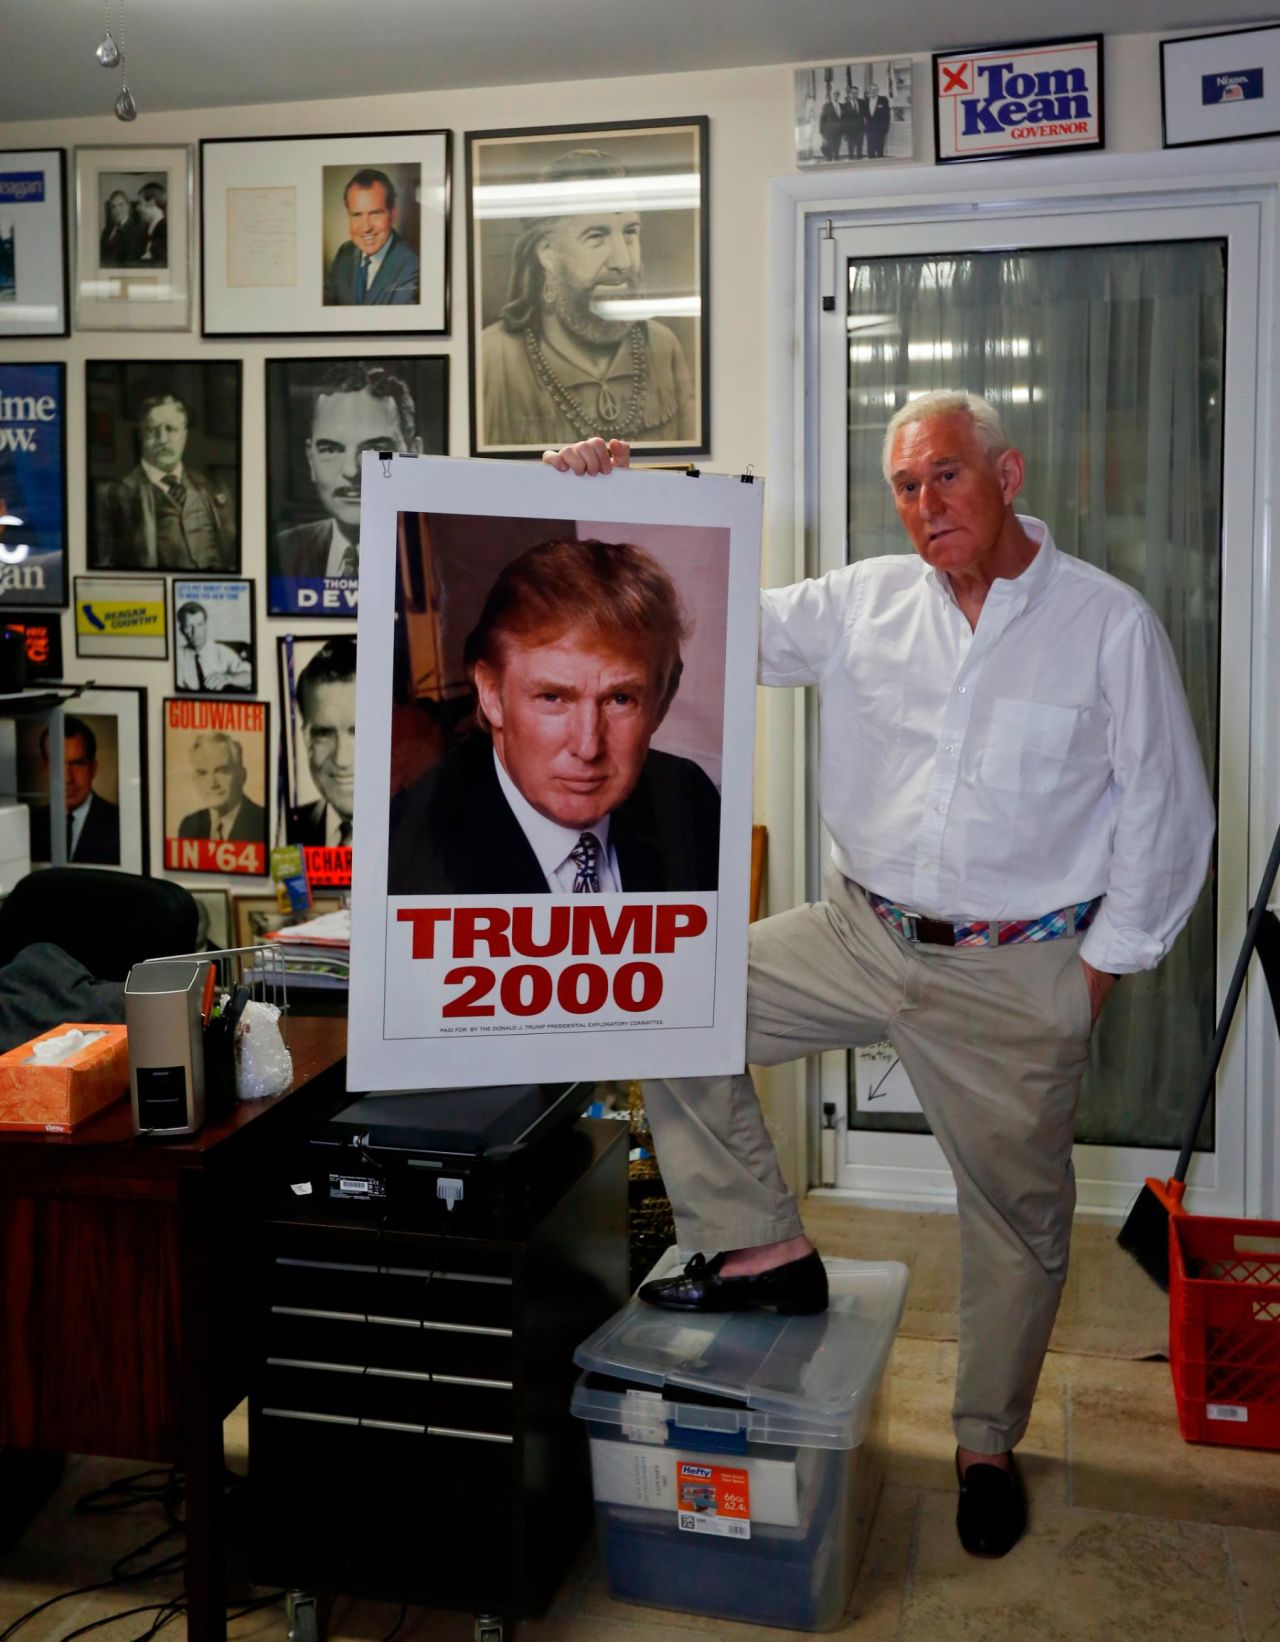 Stone poses with a 2000 poster of Donald Trump in his office in Florida.